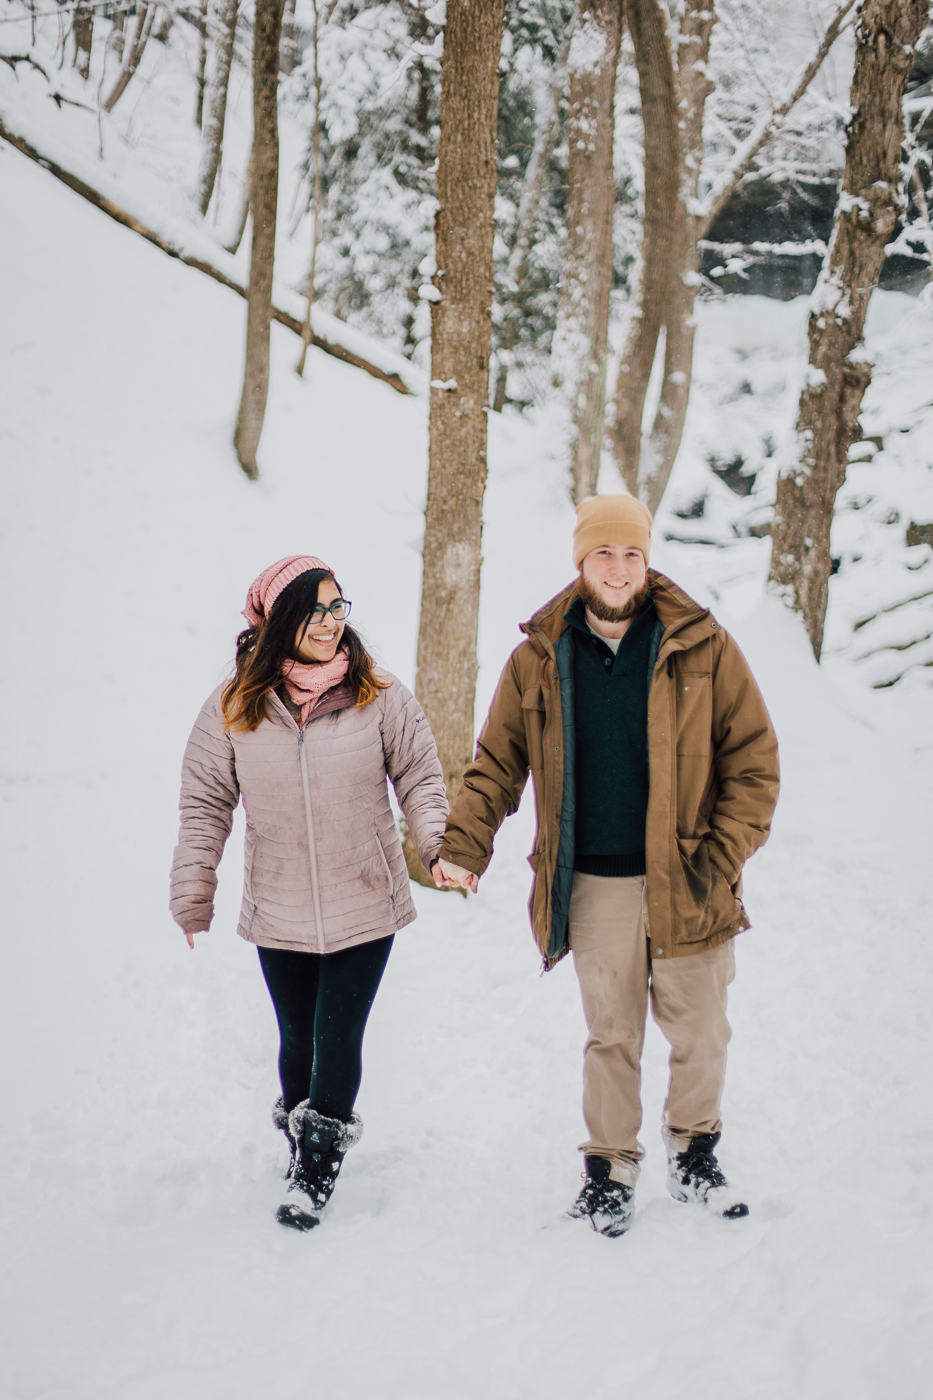  engaged couple walks through the snow at Tinker Falls during an adventure photoshoot with Brittany Juravich   